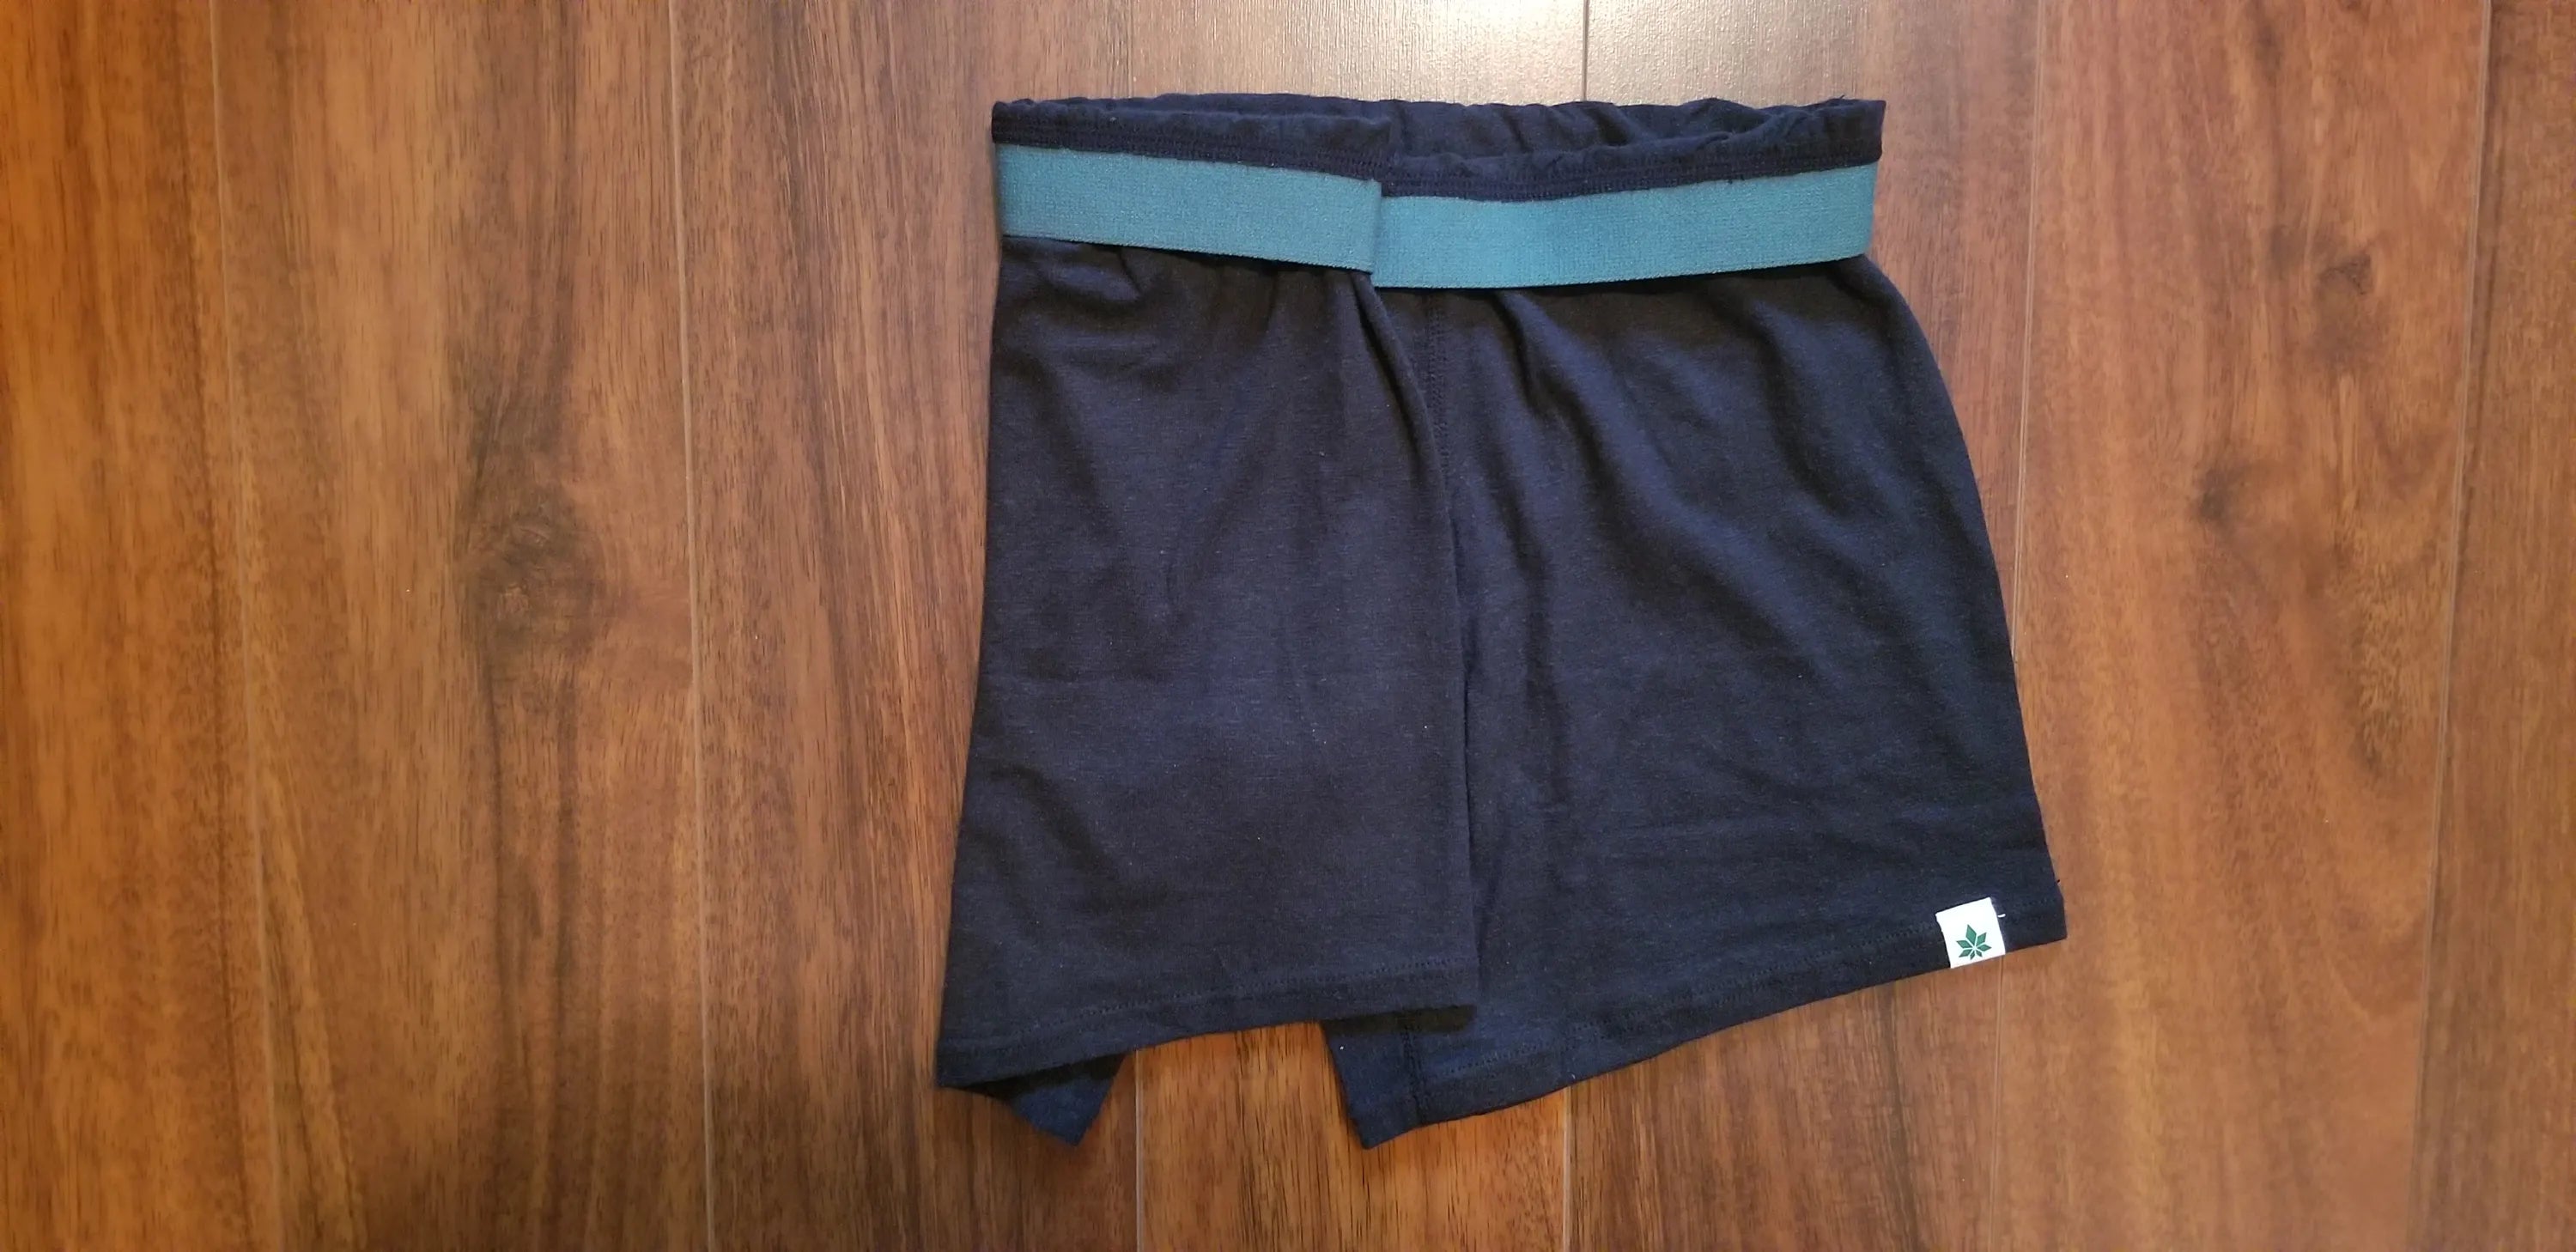 How To Fold A Boxer Shorts